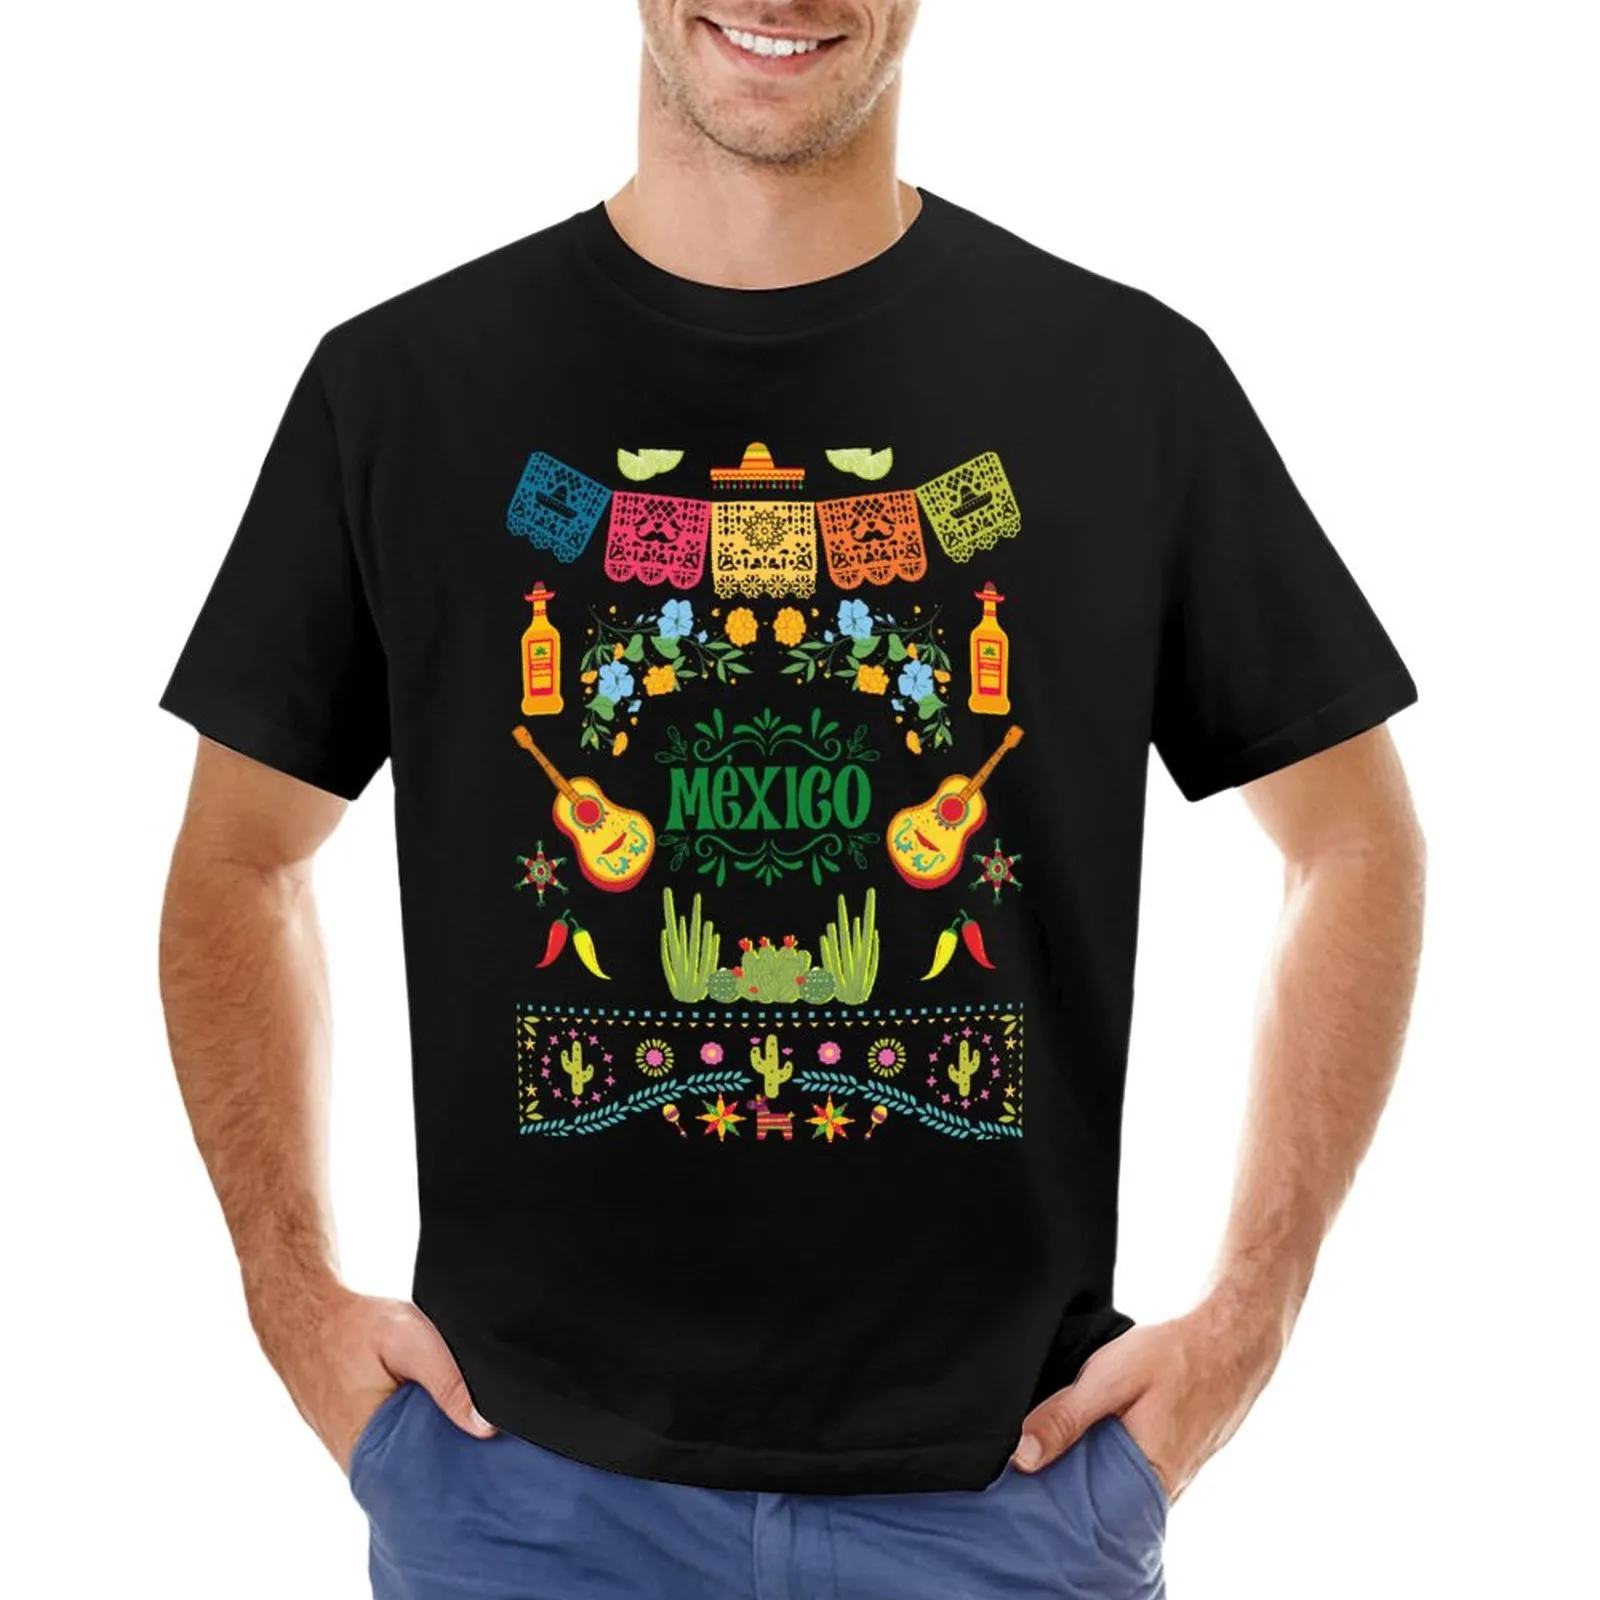 Mexico City T-Shirt Day of The Dead Summer Man Clothes Shirts Graphic Tees Woman Mens T Shirt Ropa Hombre Camisetas Tops